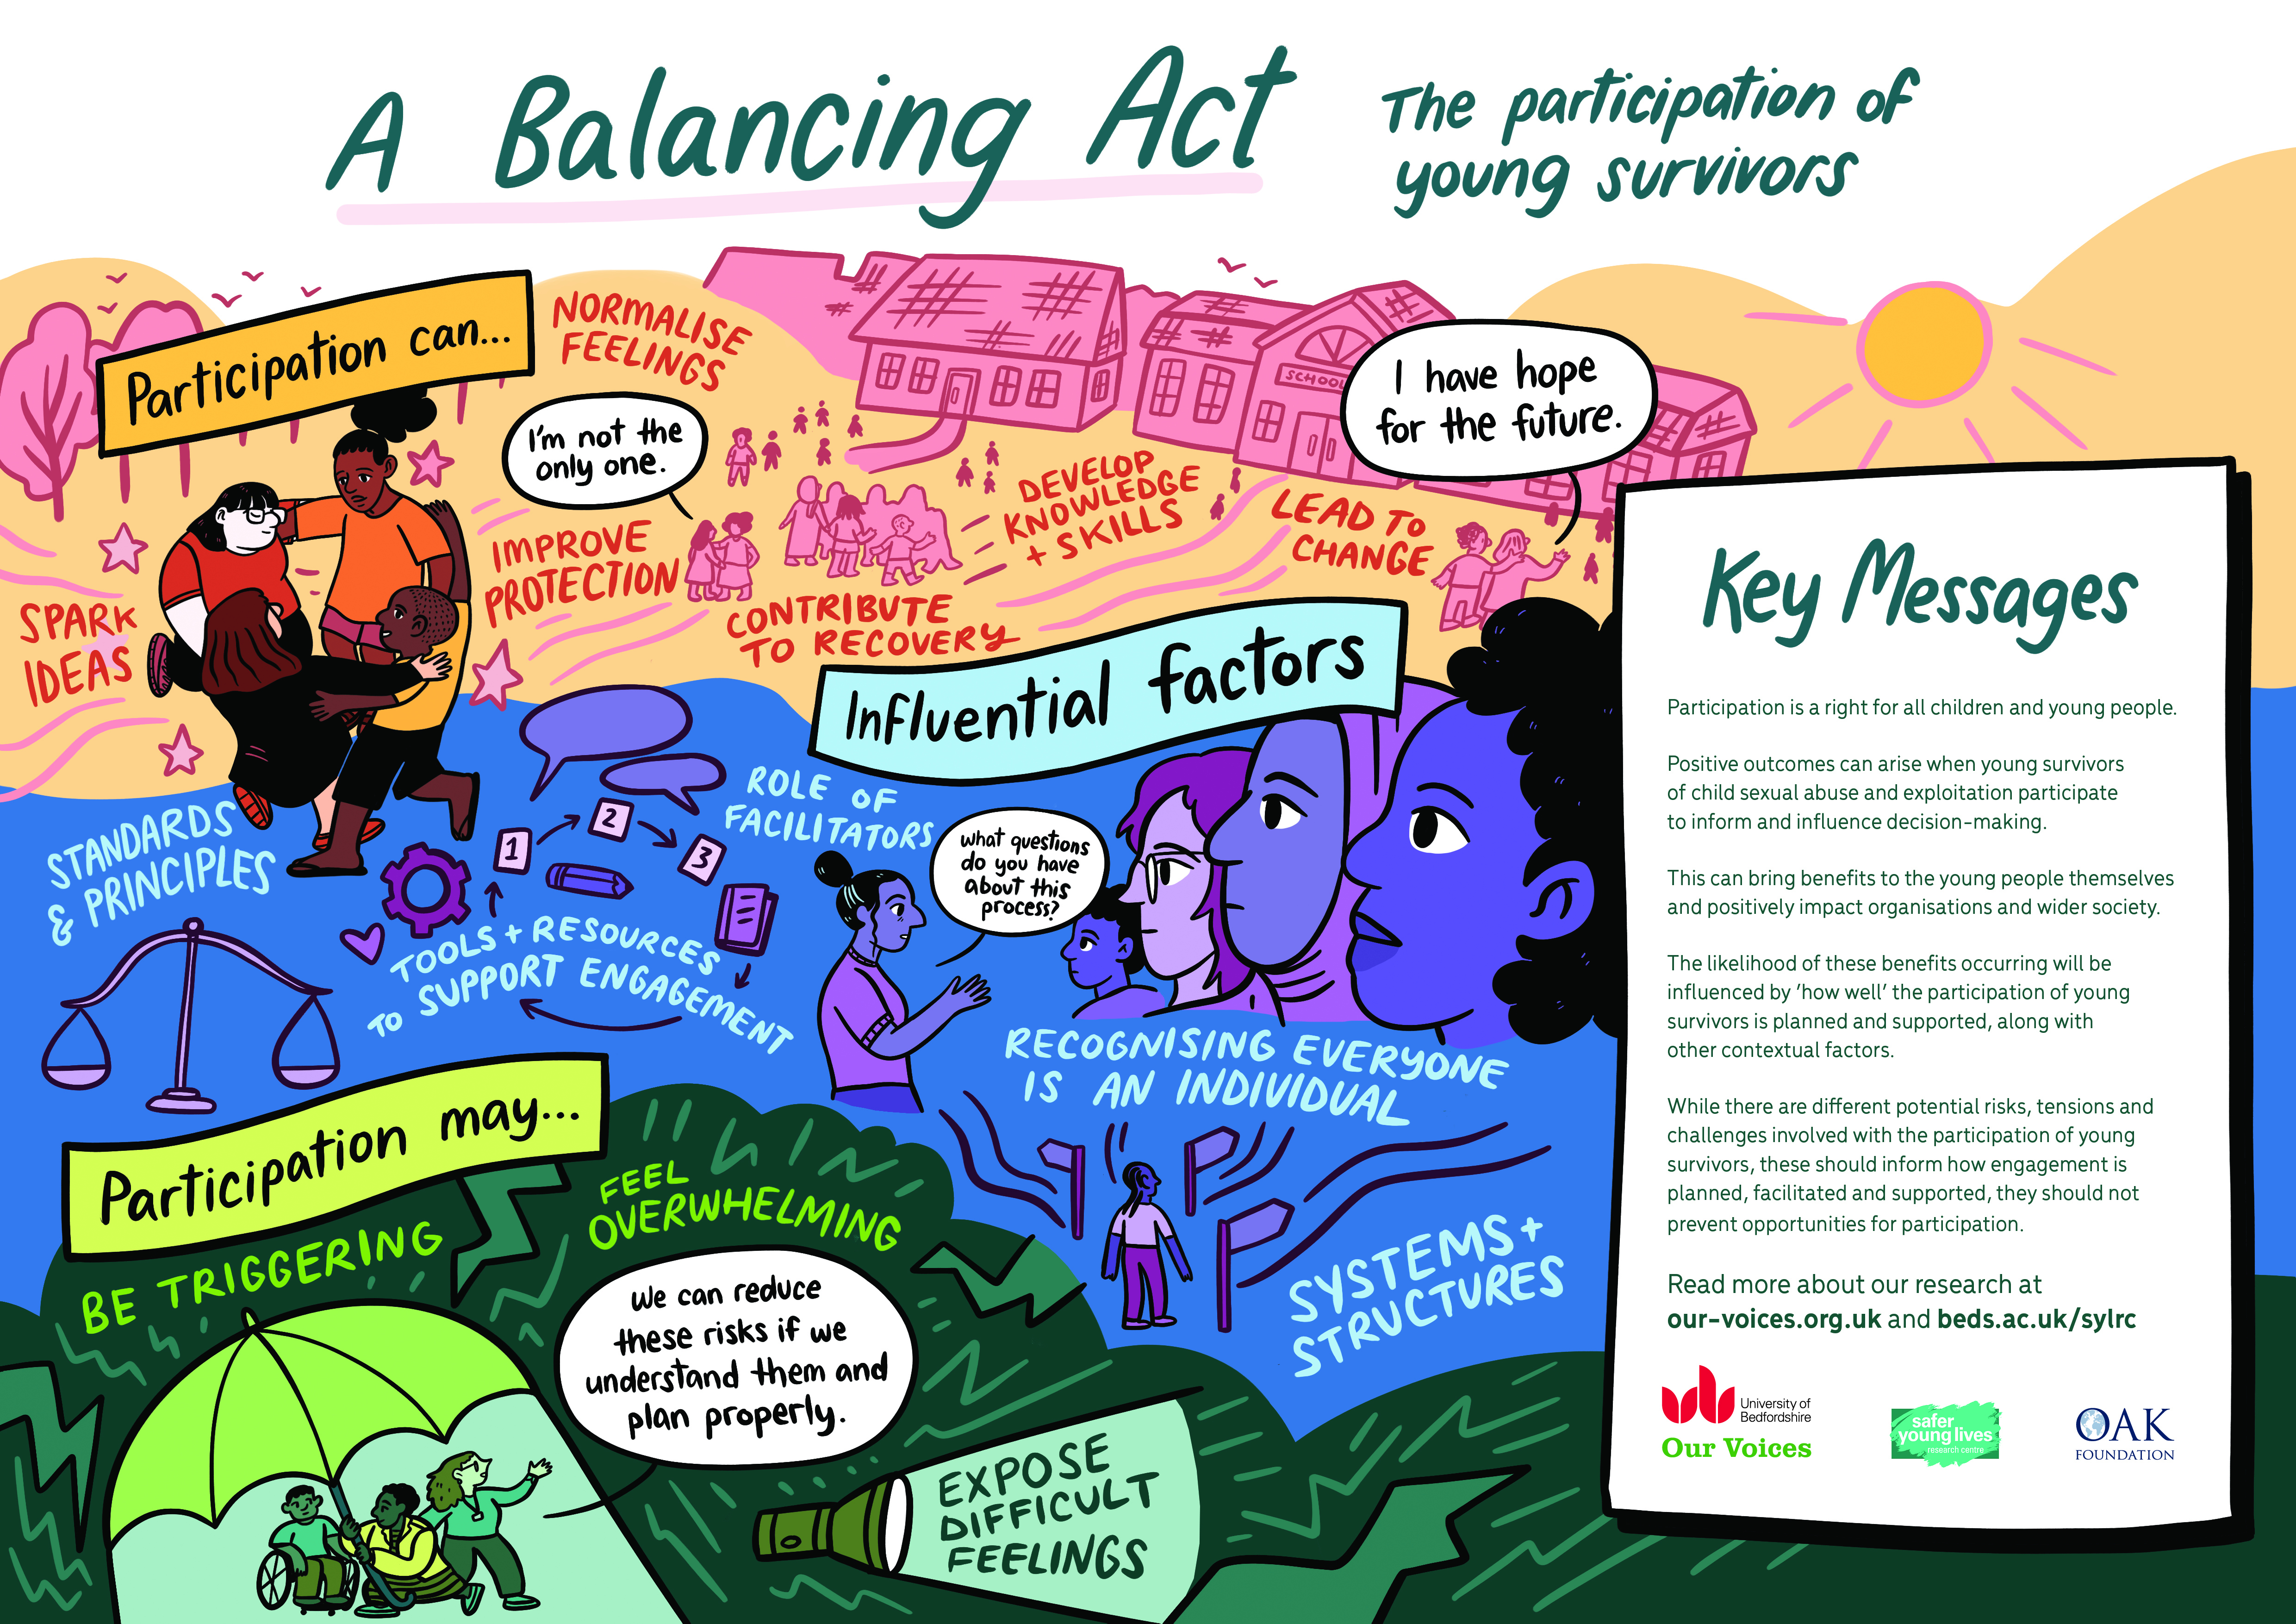 A Balancing Act: The participation of young survivors